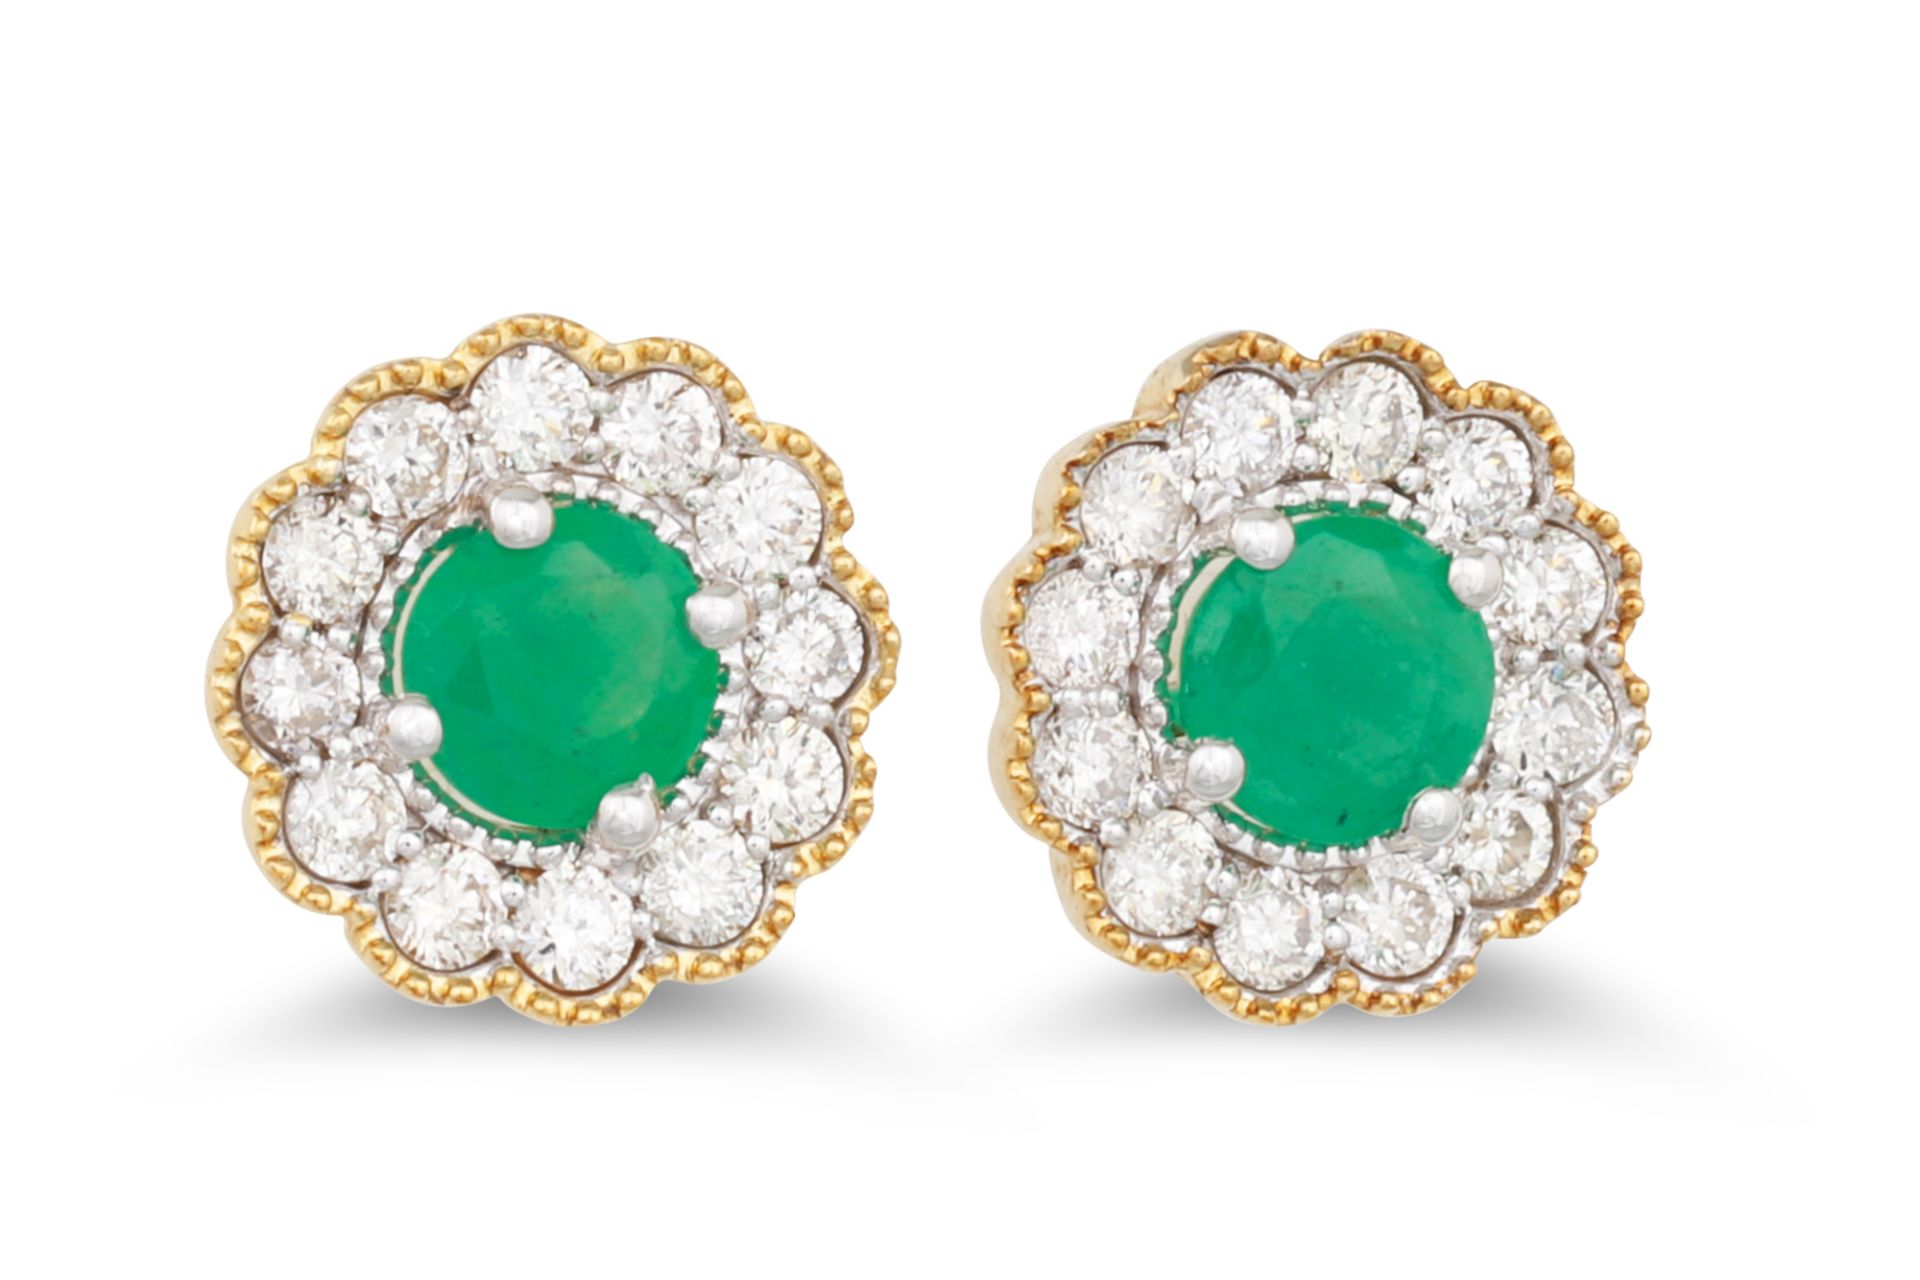 A PAIR OF DIAMOND AND EMERALD TARGET EARRINGS, the round emerald to diamond surround, mounted in 9ct